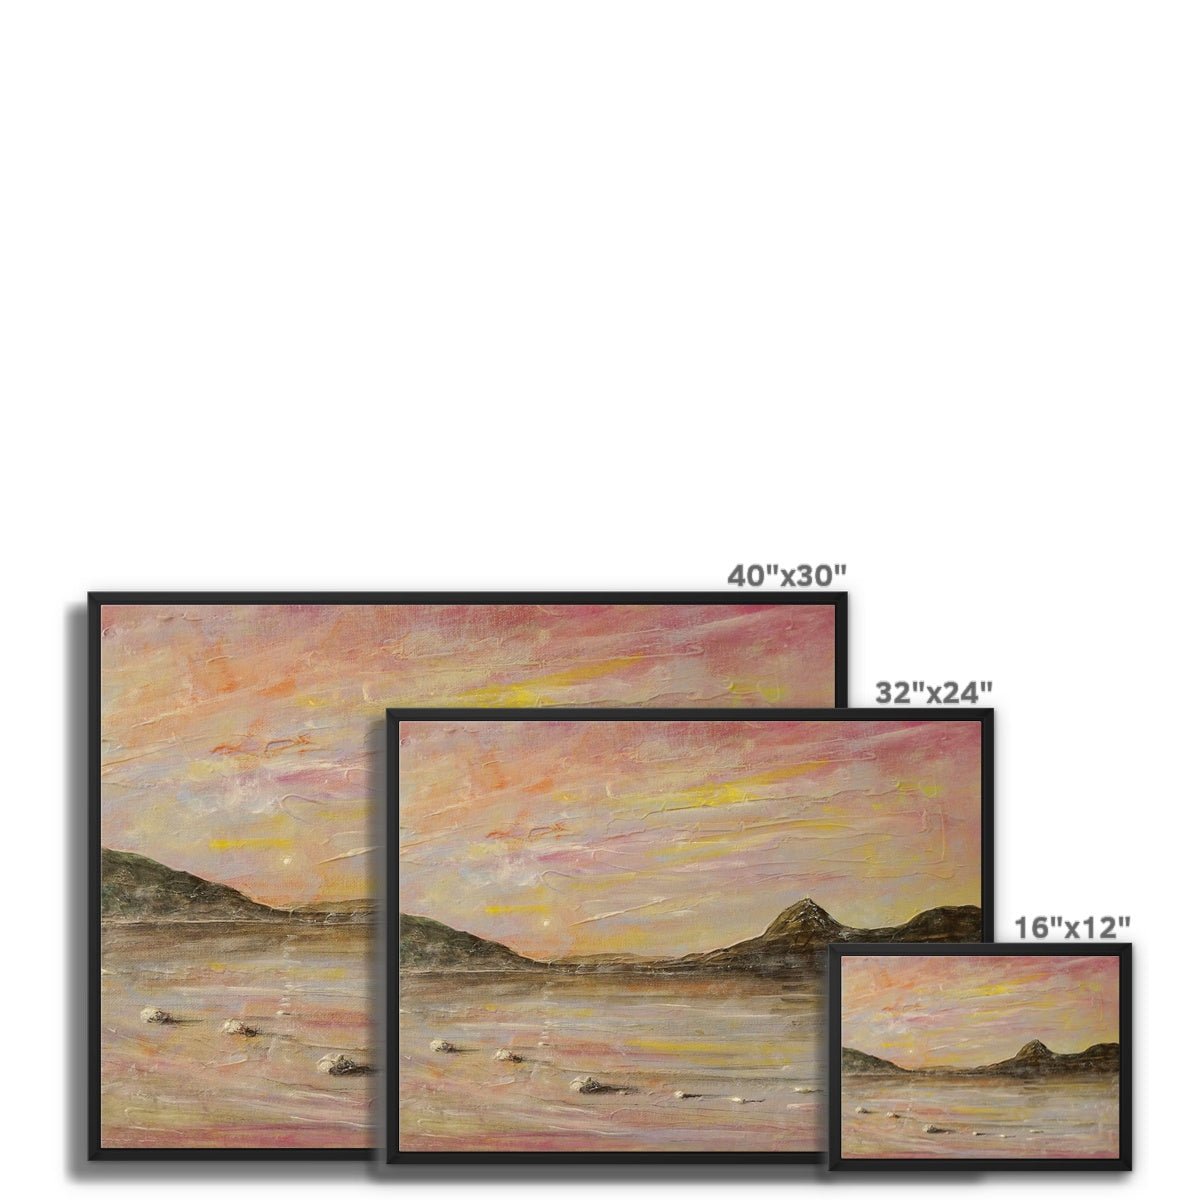 Loch Rannoch Dawn Painting | Framed Canvas From Scotland-Floating Framed Canvas Prints-Scottish Lochs & Mountains Art Gallery-Paintings, Prints, Homeware, Art Gifts From Scotland By Scottish Artist Kevin Hunter